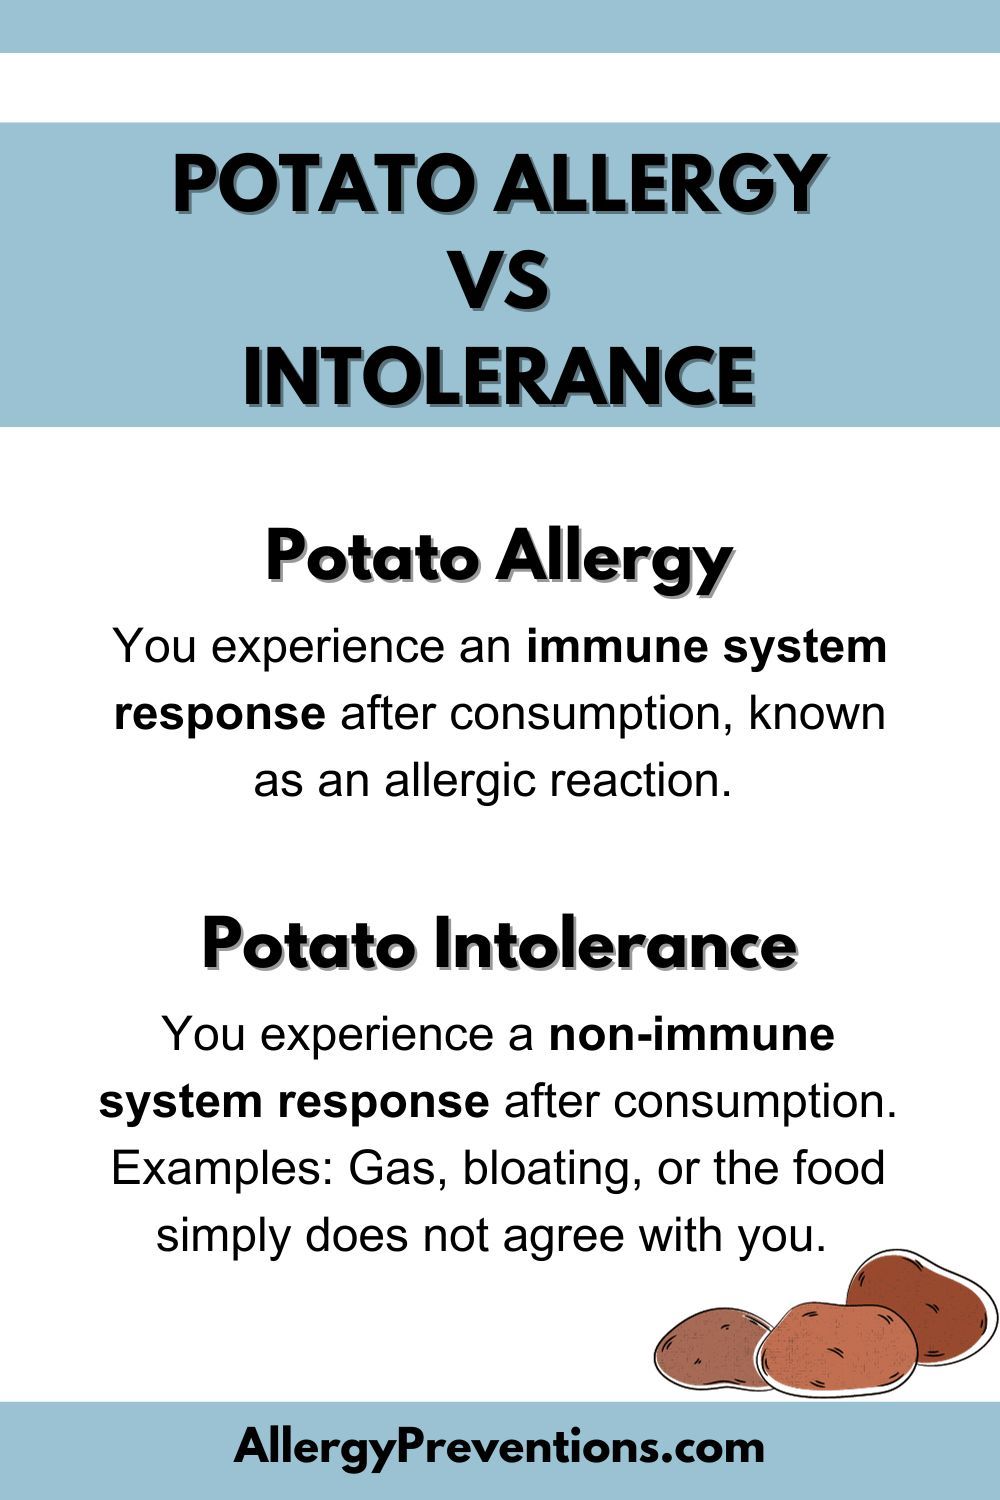 Potato allergy verses intolerance infographic. Potato Allergy: You experience an immune system response after consumption, known as an allergic reaction. Potato intolerance: You experience a non-immune system response after consumption. Examples: Gas, bloating, or the food simply does not agree with you.